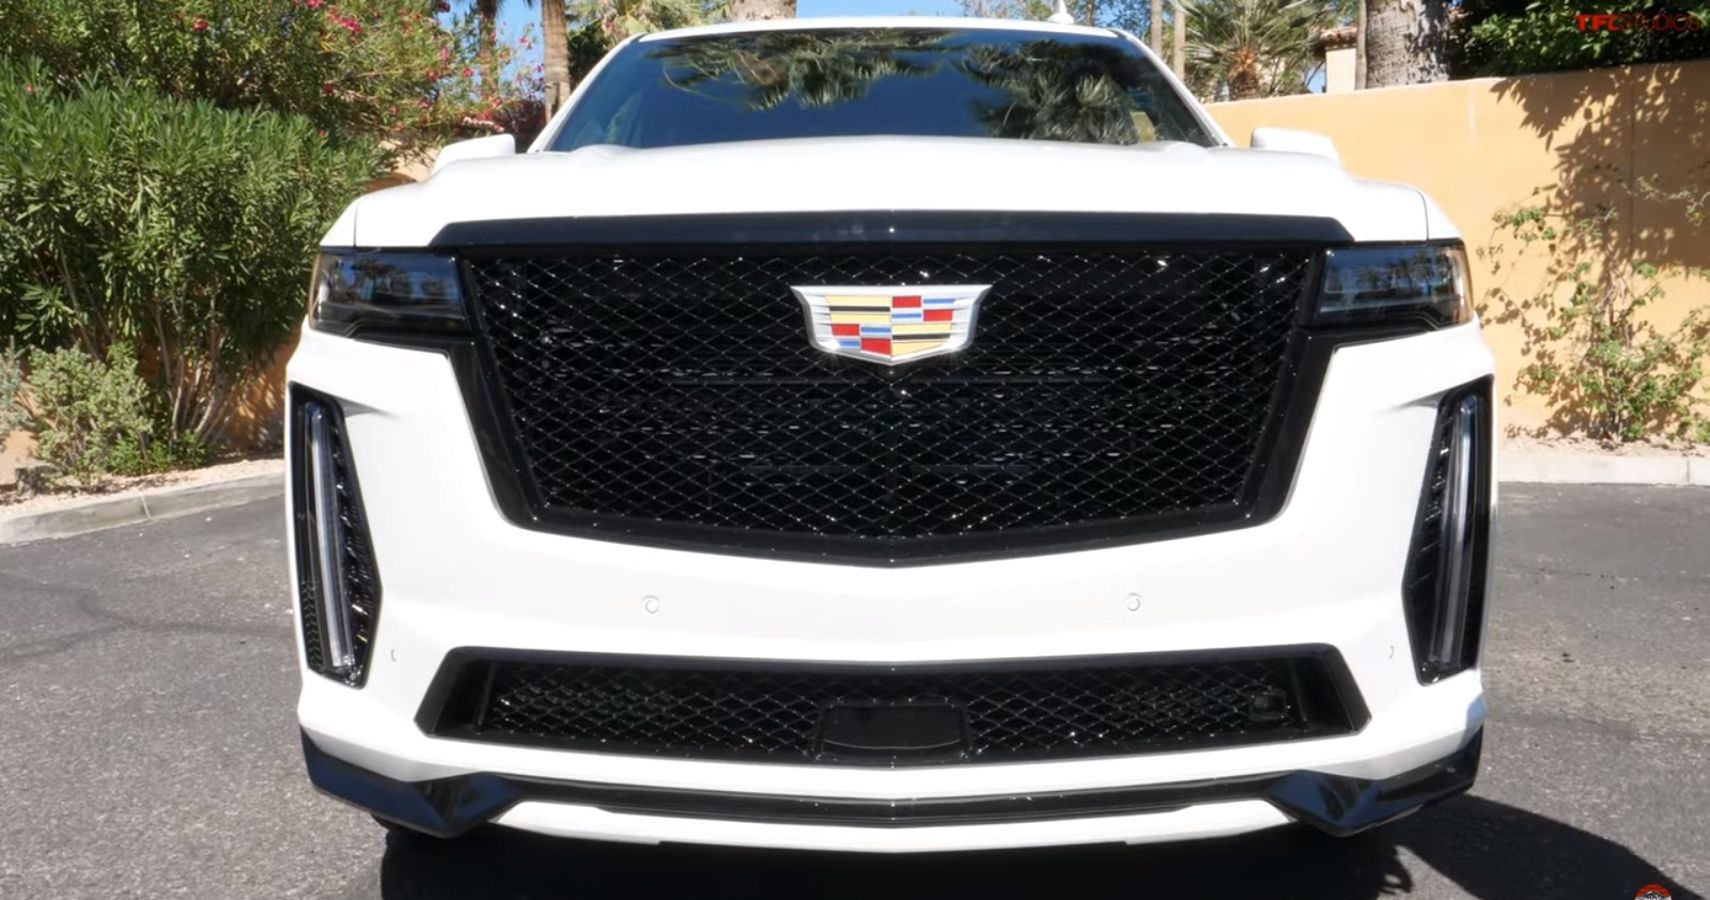 The Fast Lane Truck YouTube Channel Cadillac Escalade V 2023 front view